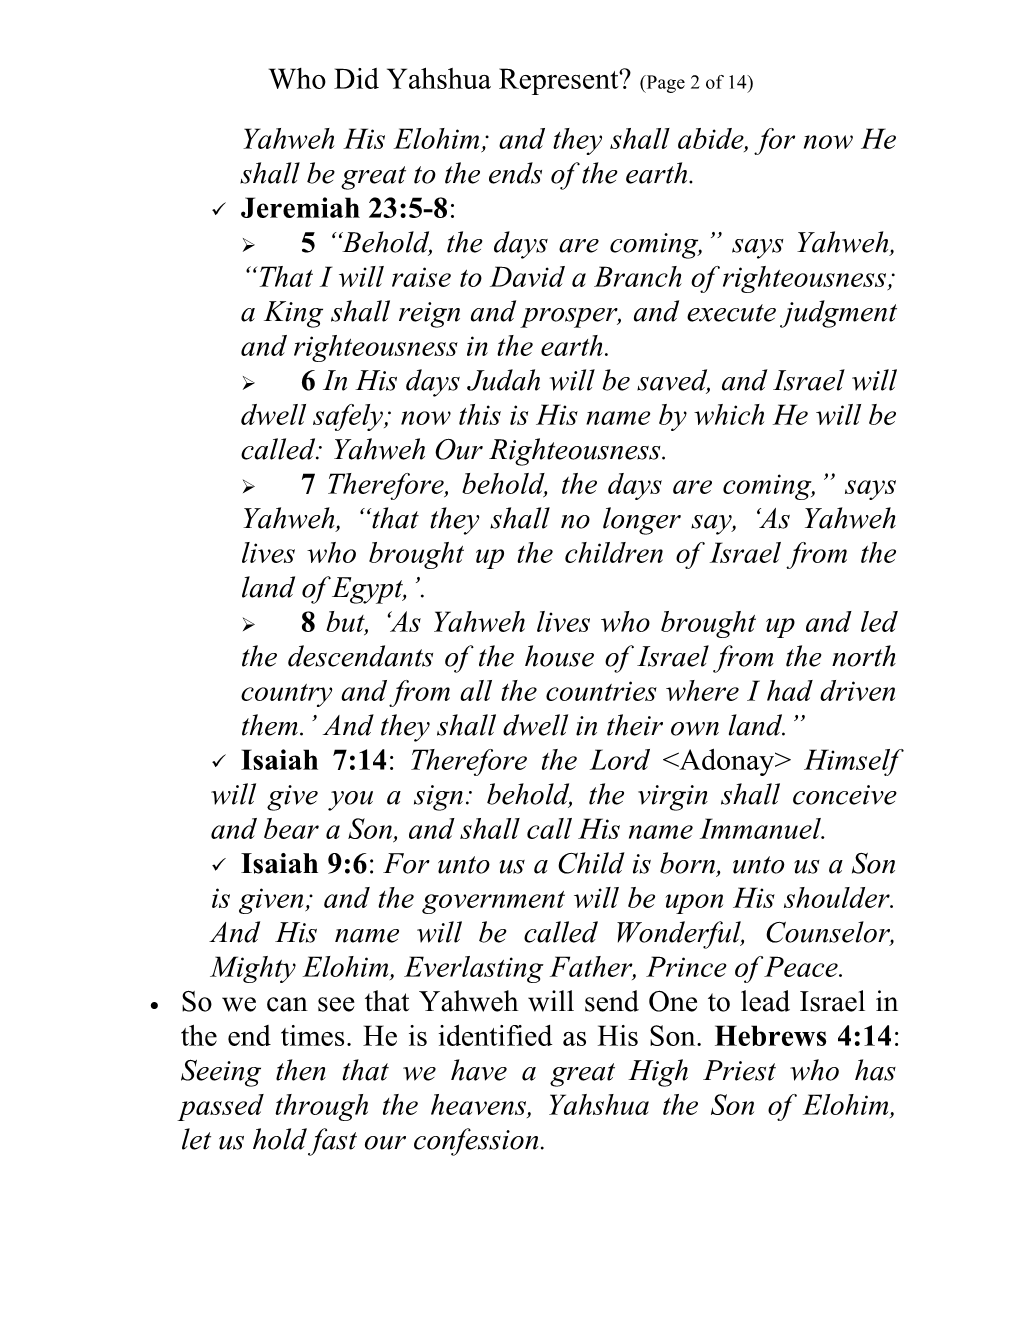 Who Did Yahshua Represent?(Page 1 of 14)